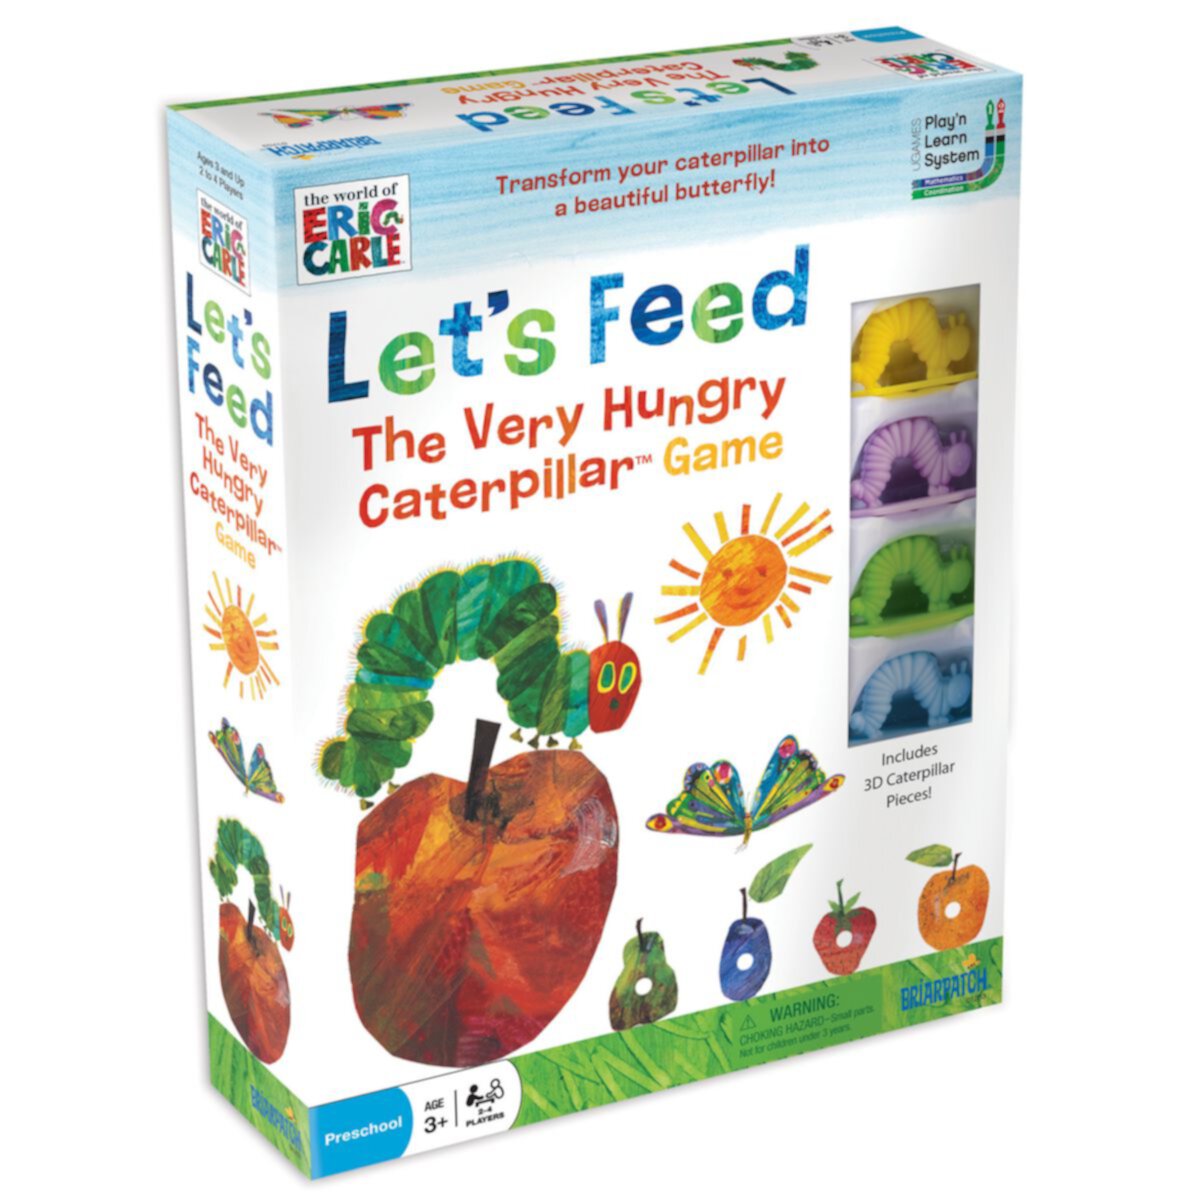 The World of Eric Carle Let's Feed the Very Hungry Caterpillar Game by Briarpatch Briarpatch